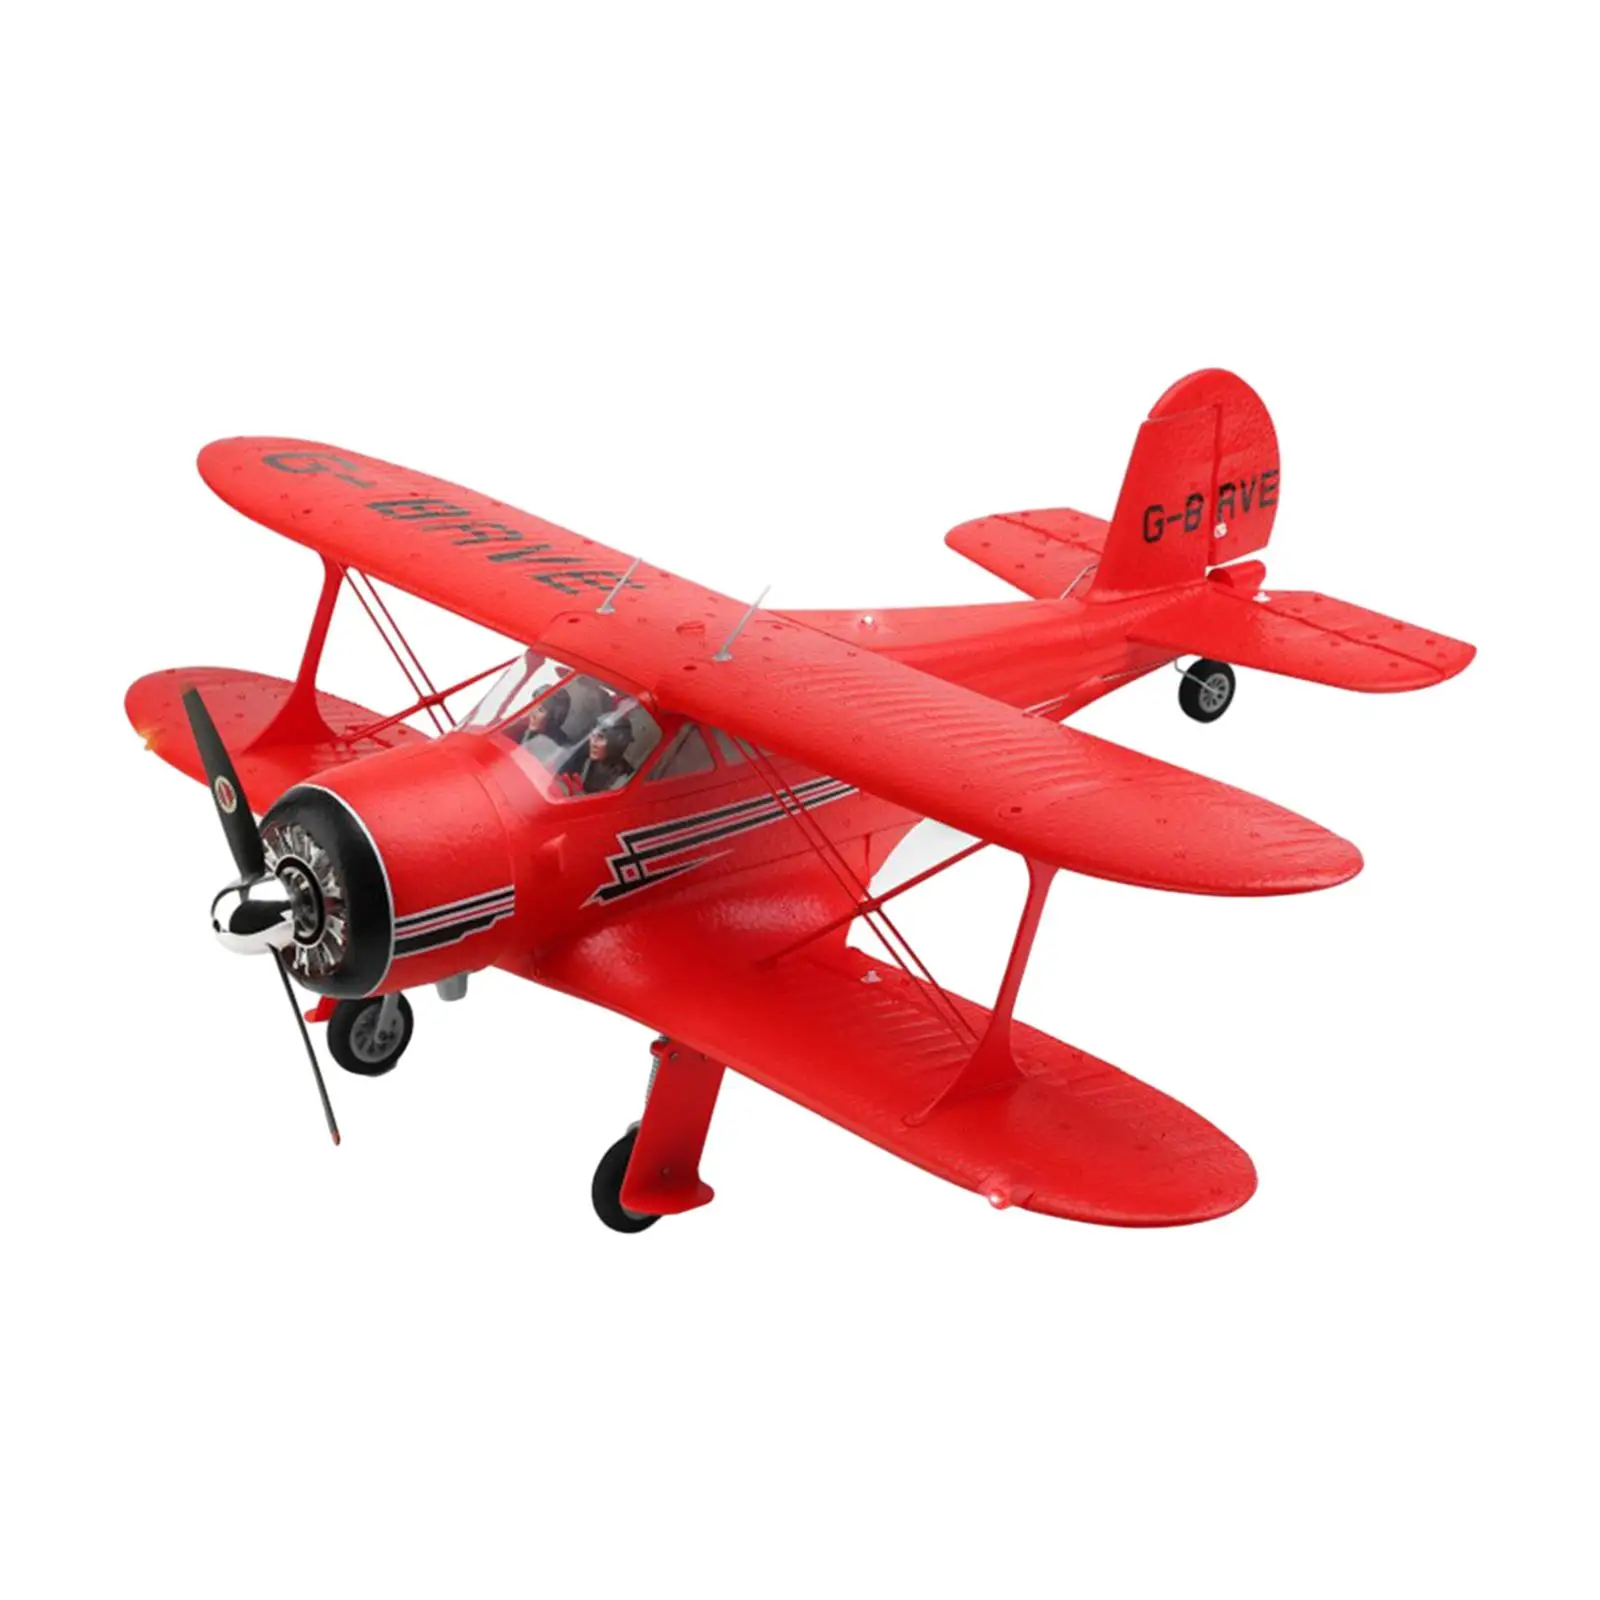 Wltoys A300 Beech D17S RC Plane with 3D/6G Mode Stunt Flying 4CH Easy to Fly EPP Biplane for Beginner Kids Adults Birthday Gifts